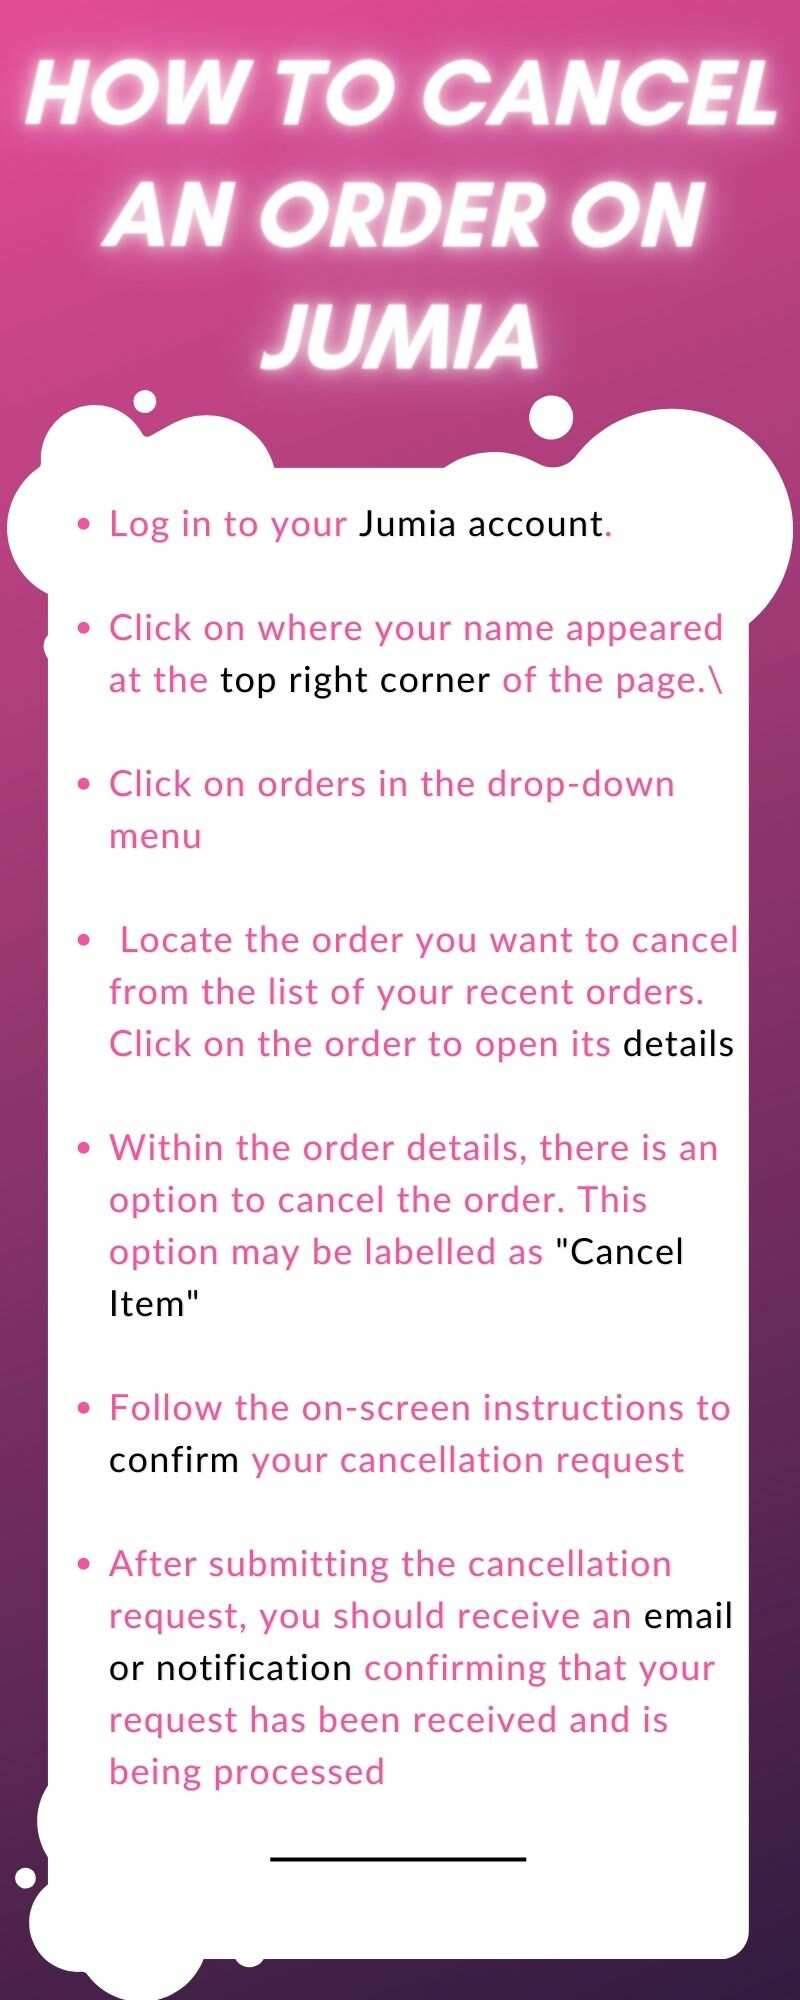 How to cancel an order on Jumia